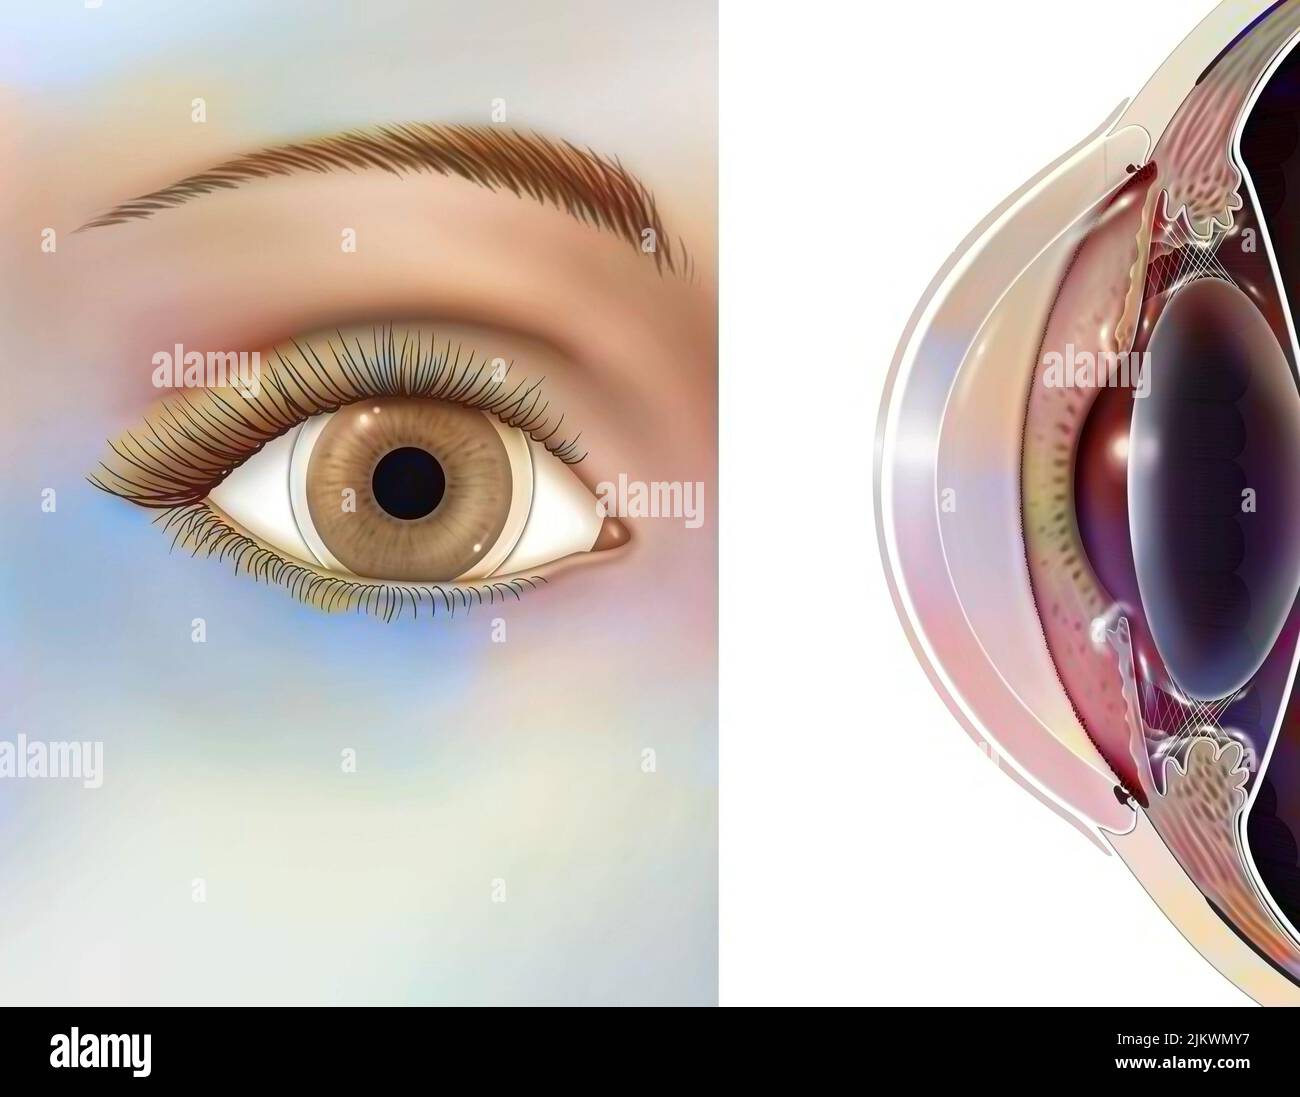 Eye: position and size of soft lenses. Stock Photo